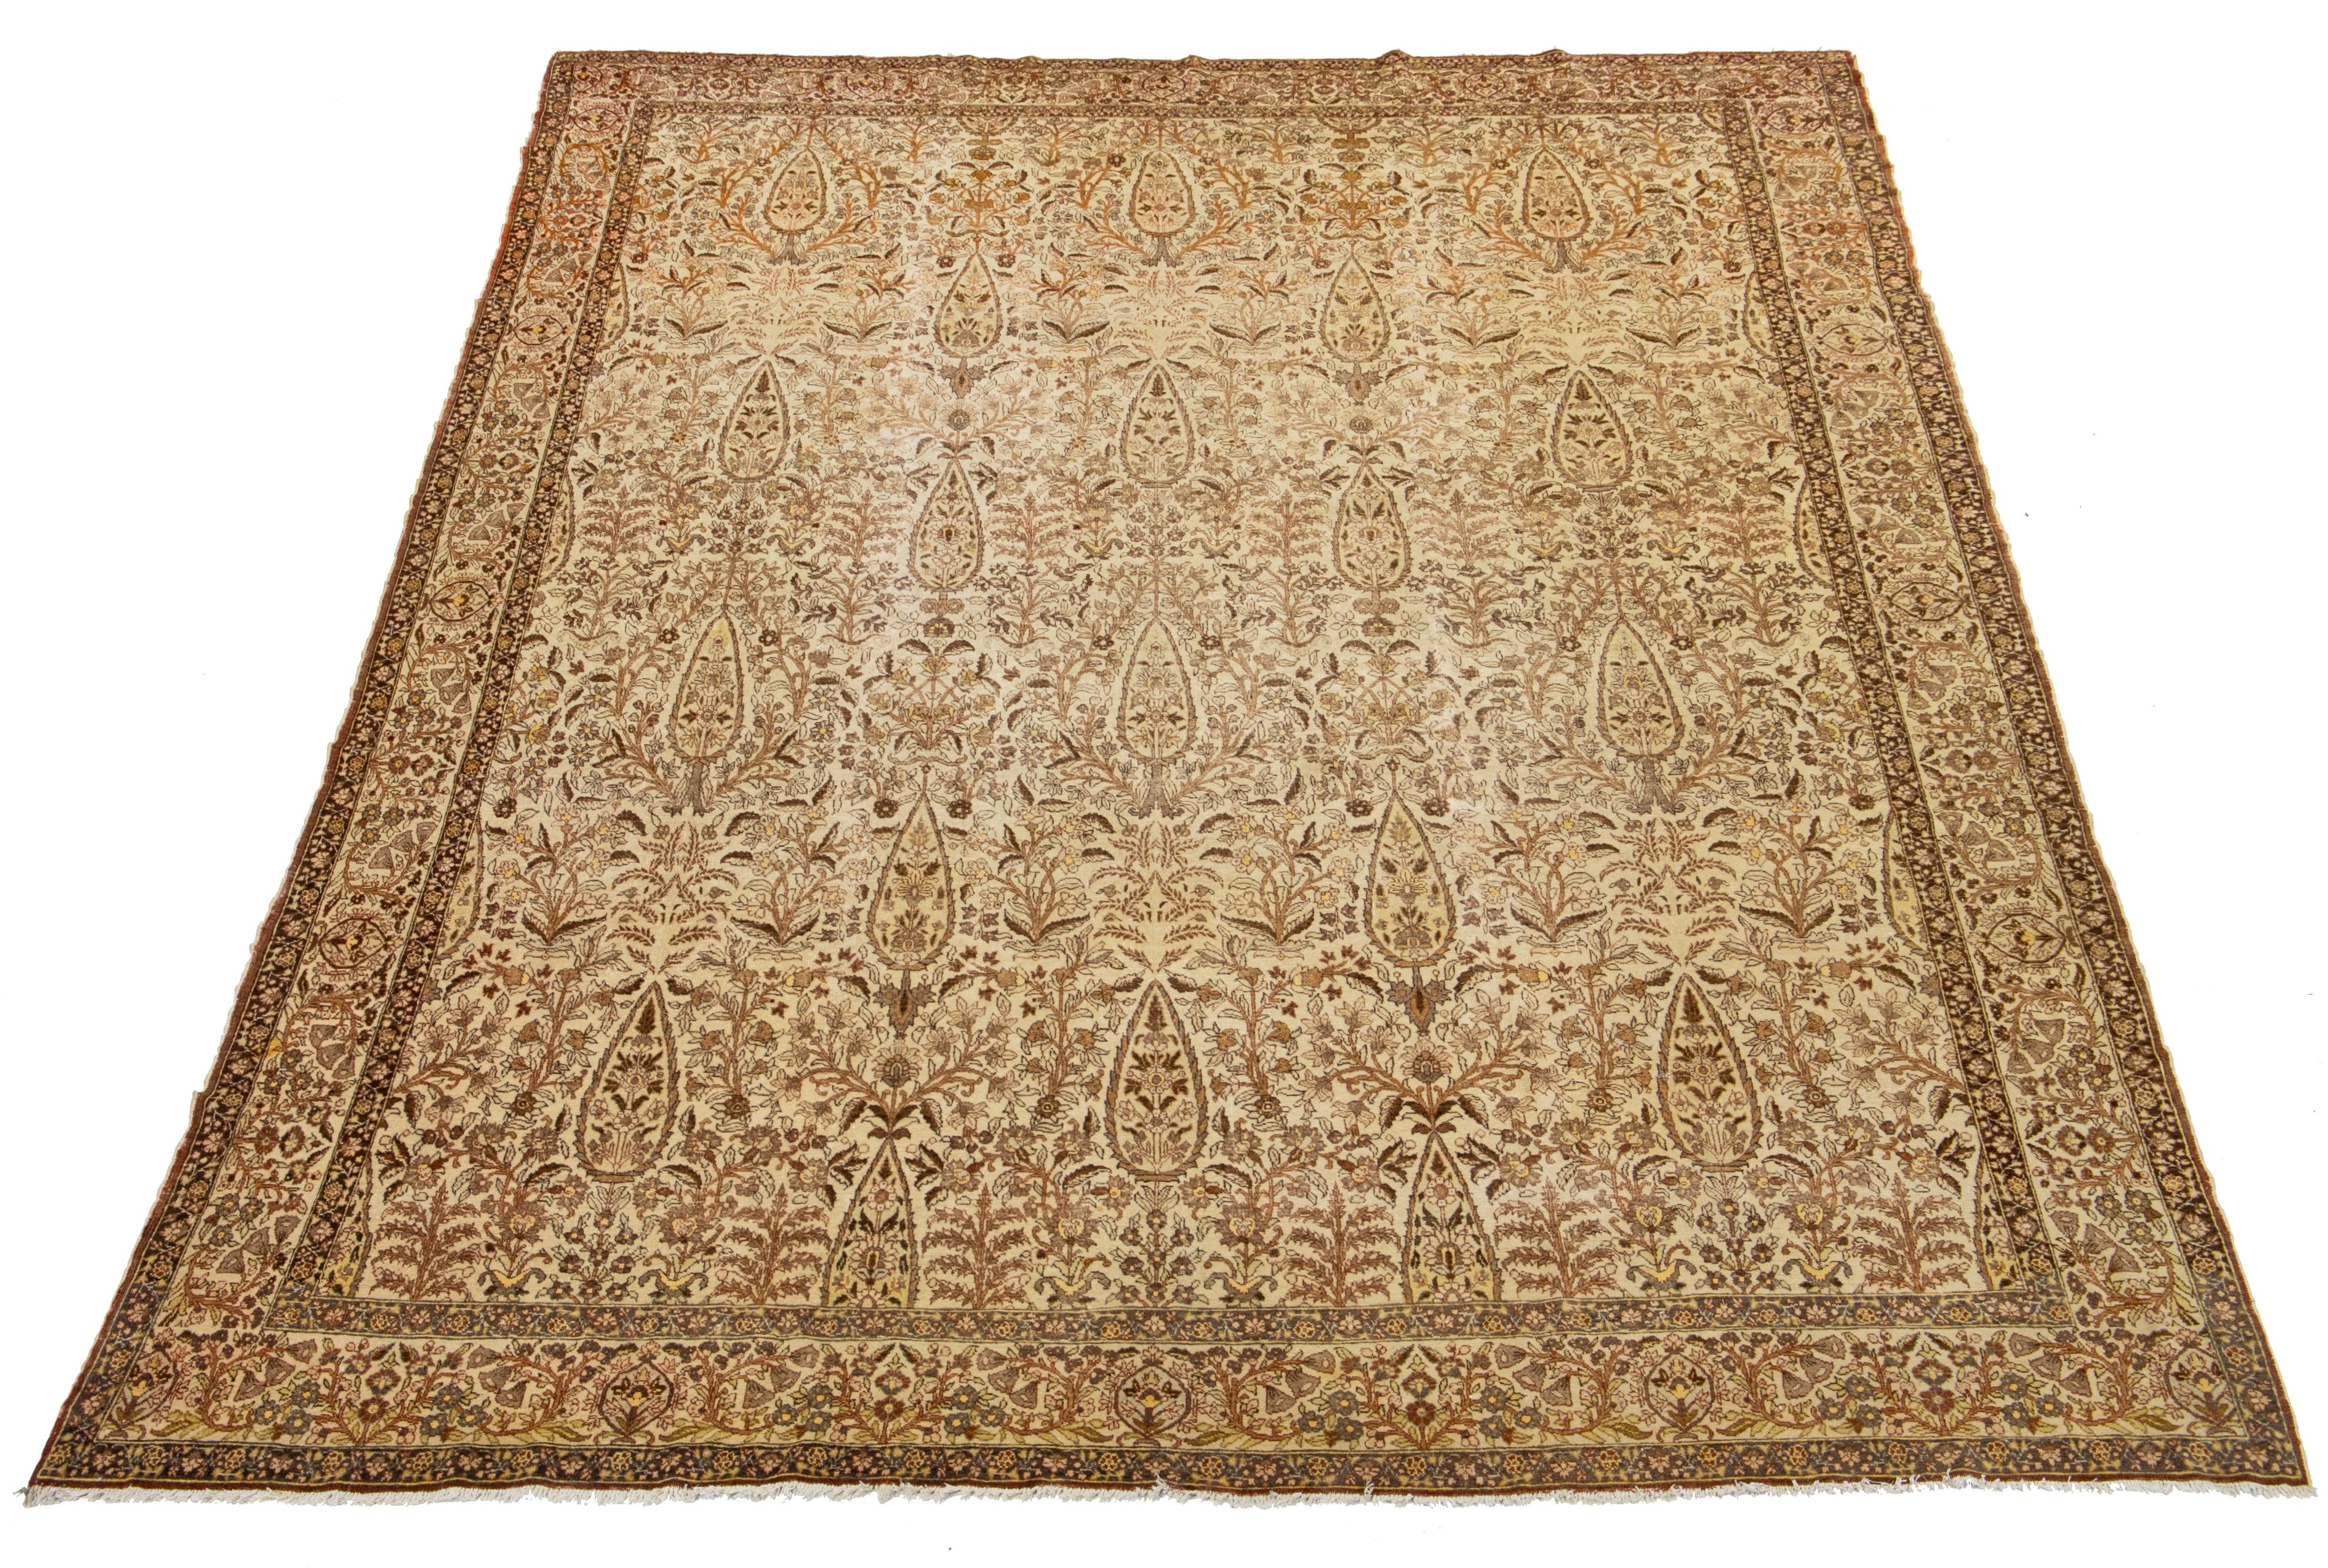 Beautiful antique Persian distressed hand-knotted wool rug with a beige field. This piece has gray, rust, and yellow accents in a gorgeous all-over floral Pattern design.

This rug measures: 9'1' x 13'2